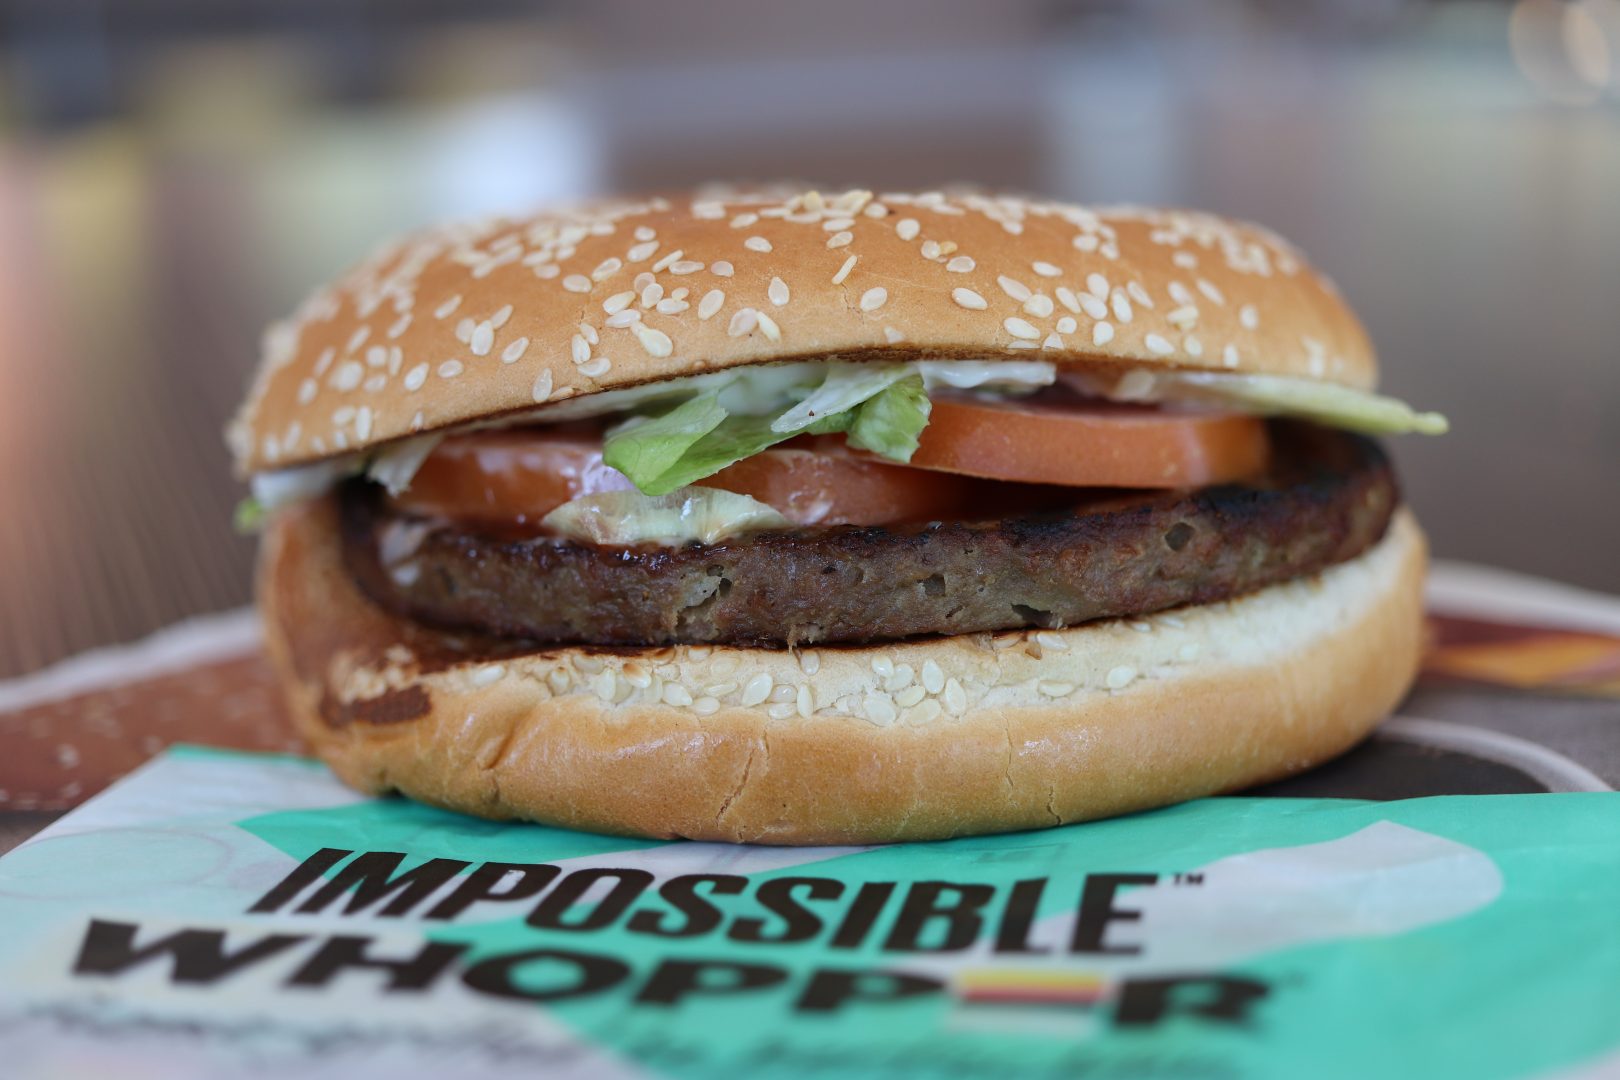 Vegan sues Burger King for cooking Impossible Whopper on same grill as meat